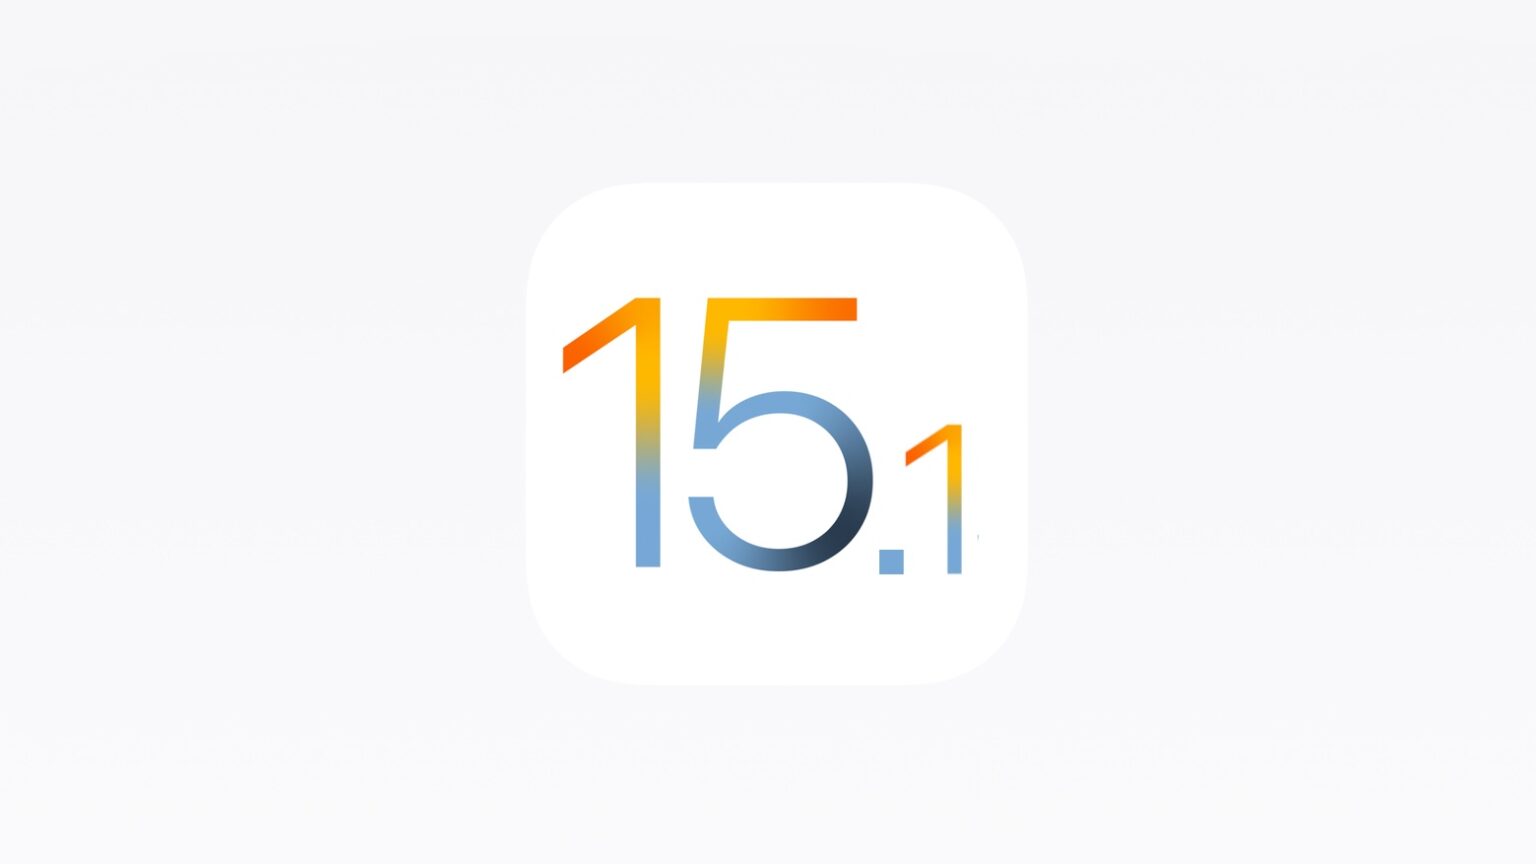 Don’t install the iOS 15.1 beta if you plan to get an iPhone 13 ASAP